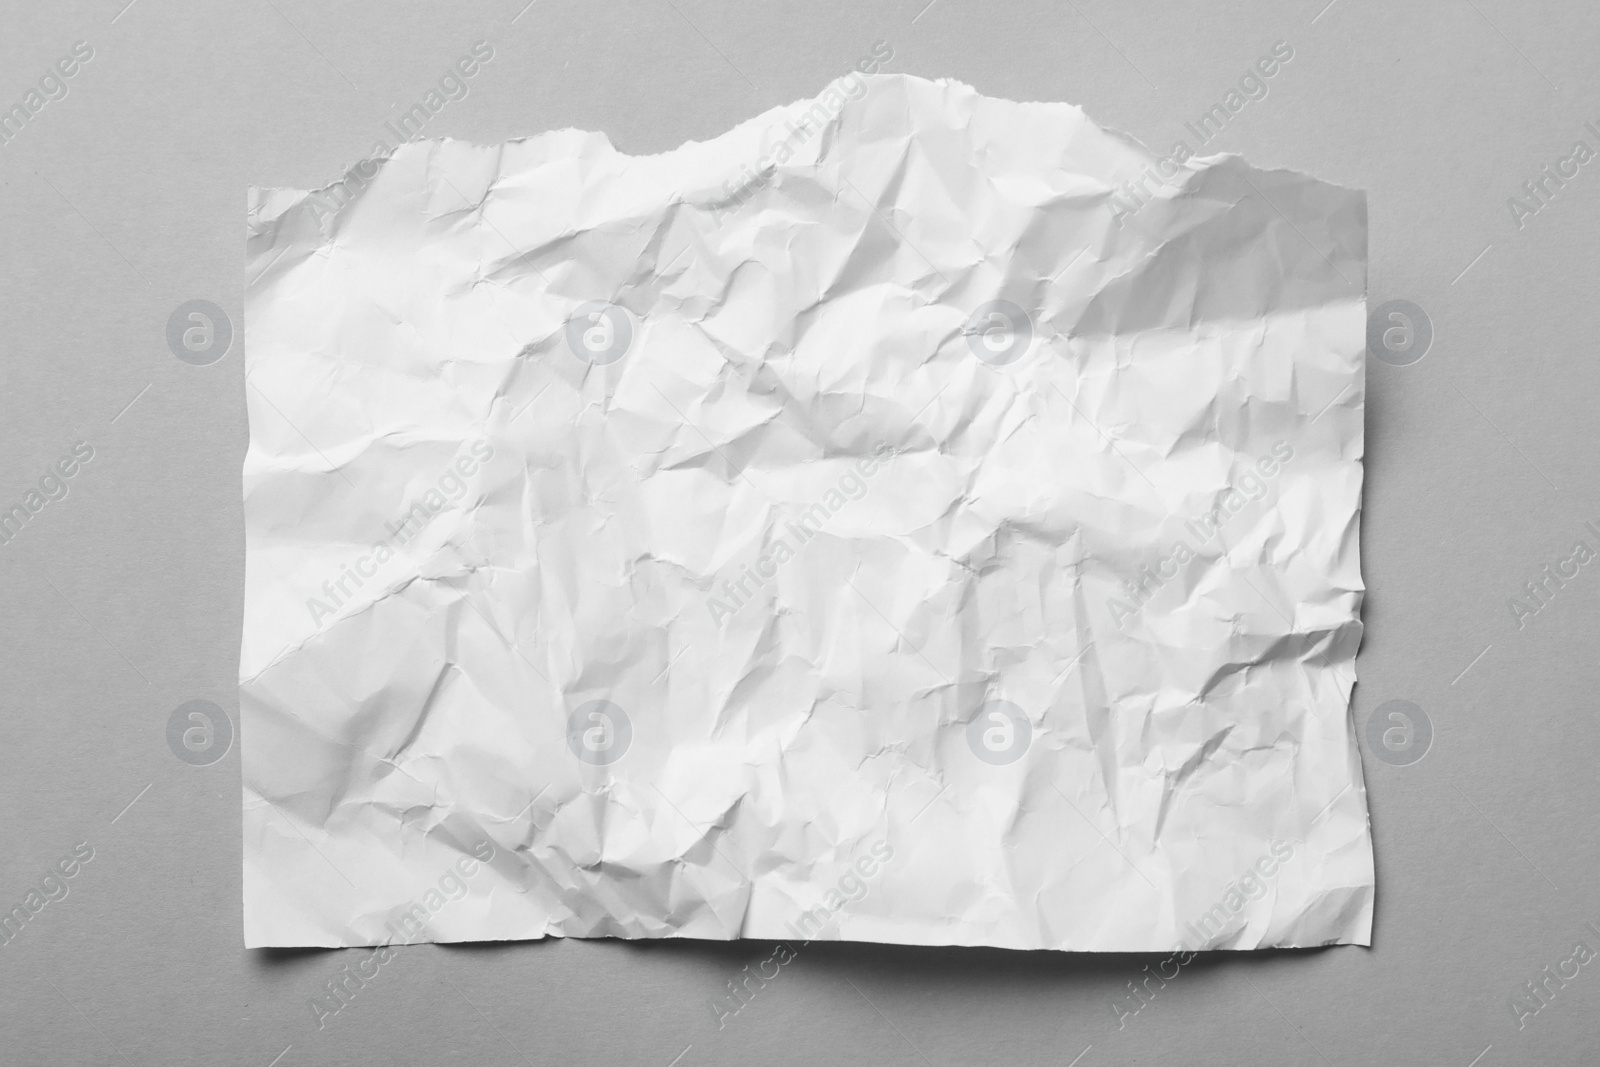 Photo of Sheet of white crumpled paper on grey background, top view